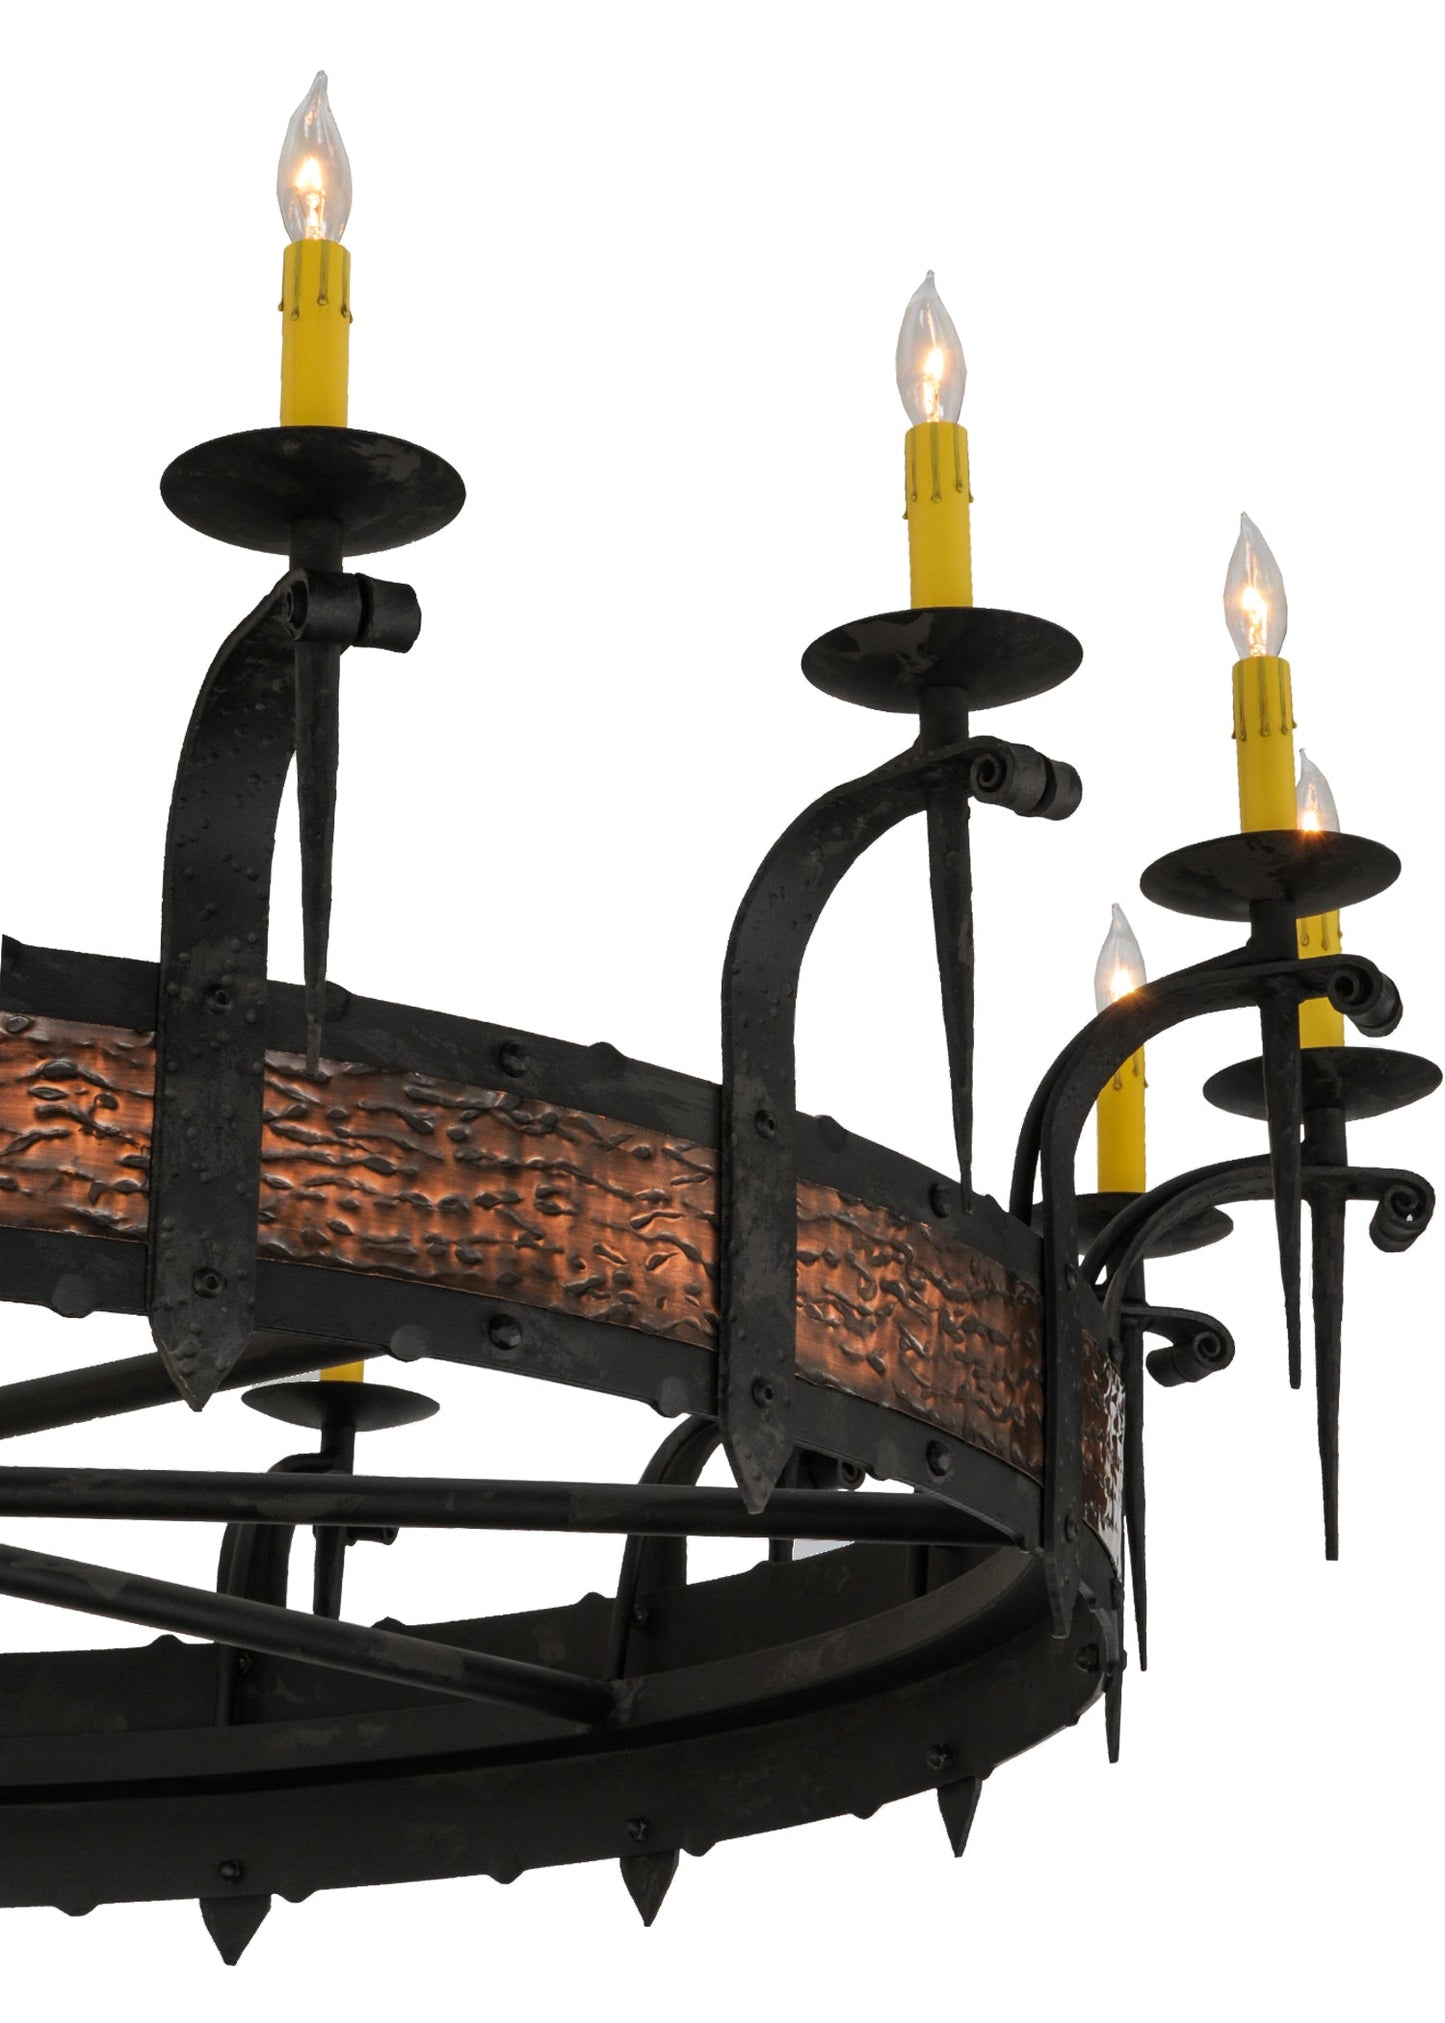 60" Costello 16-Light Chandelier by 2nd Ave Lighting